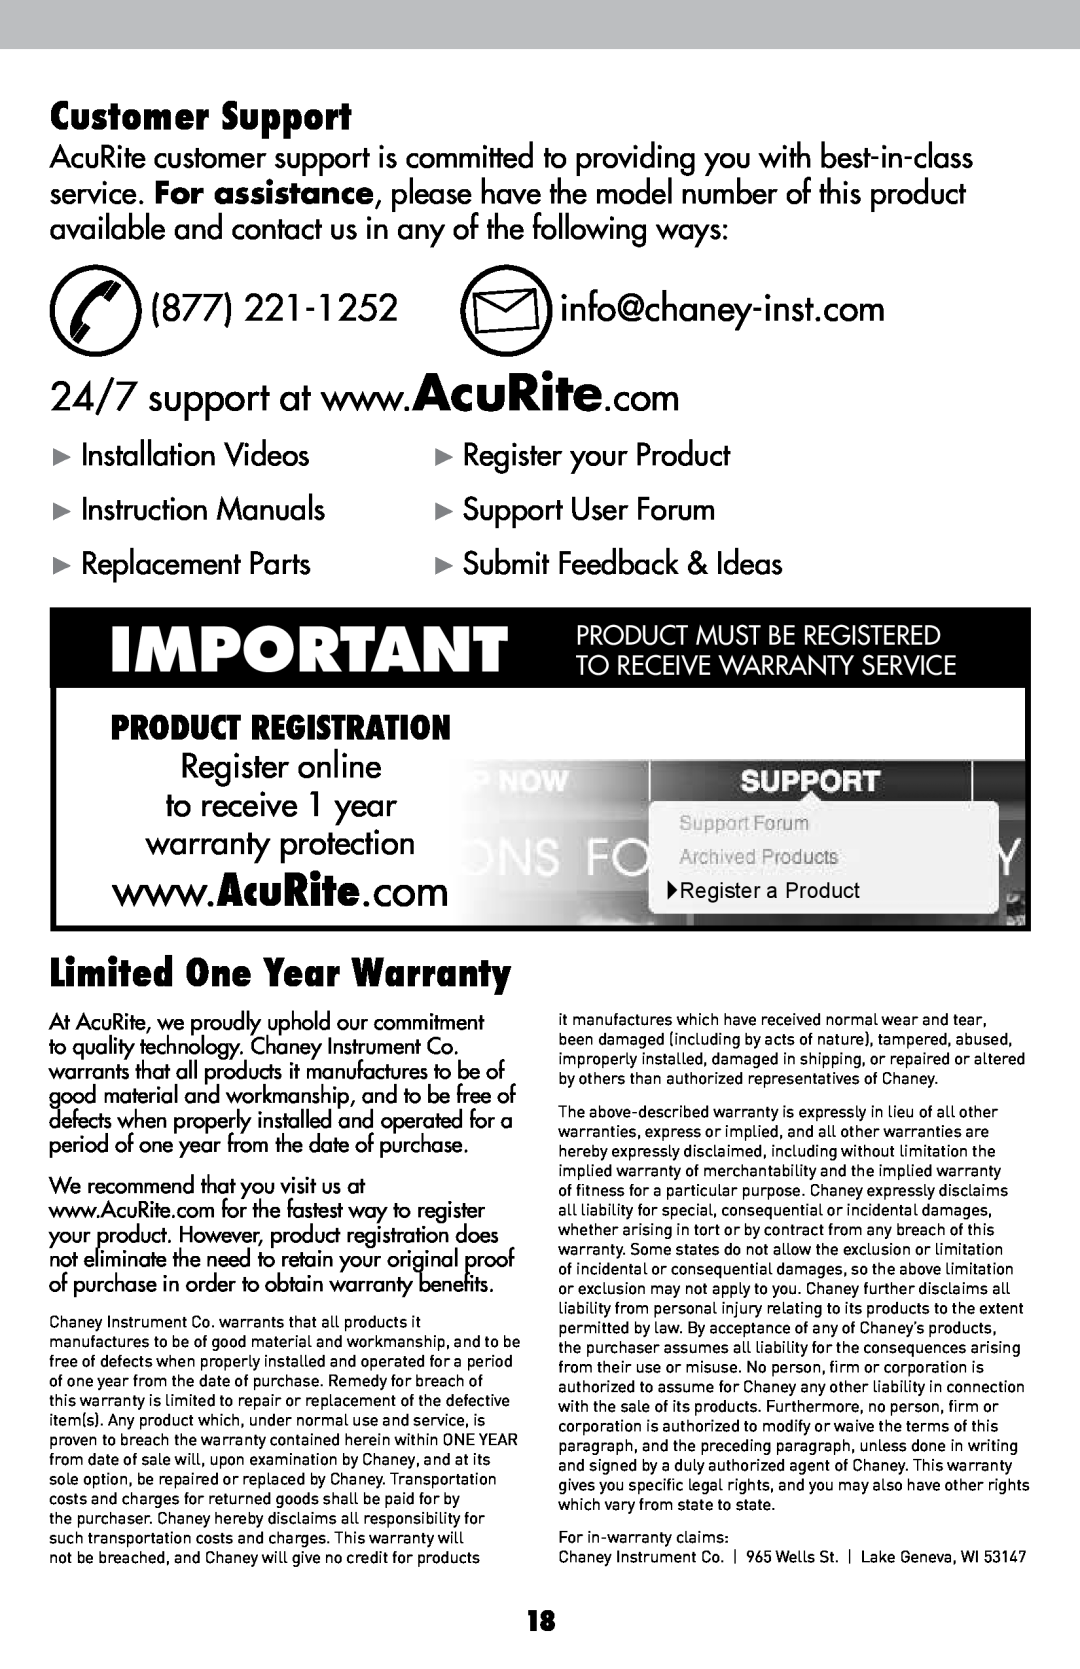 Acu-Rite 1605 Customer Support, Limited One Year Warranty, 877 221-1252 info@chaney-inst.com, Installation Videos 